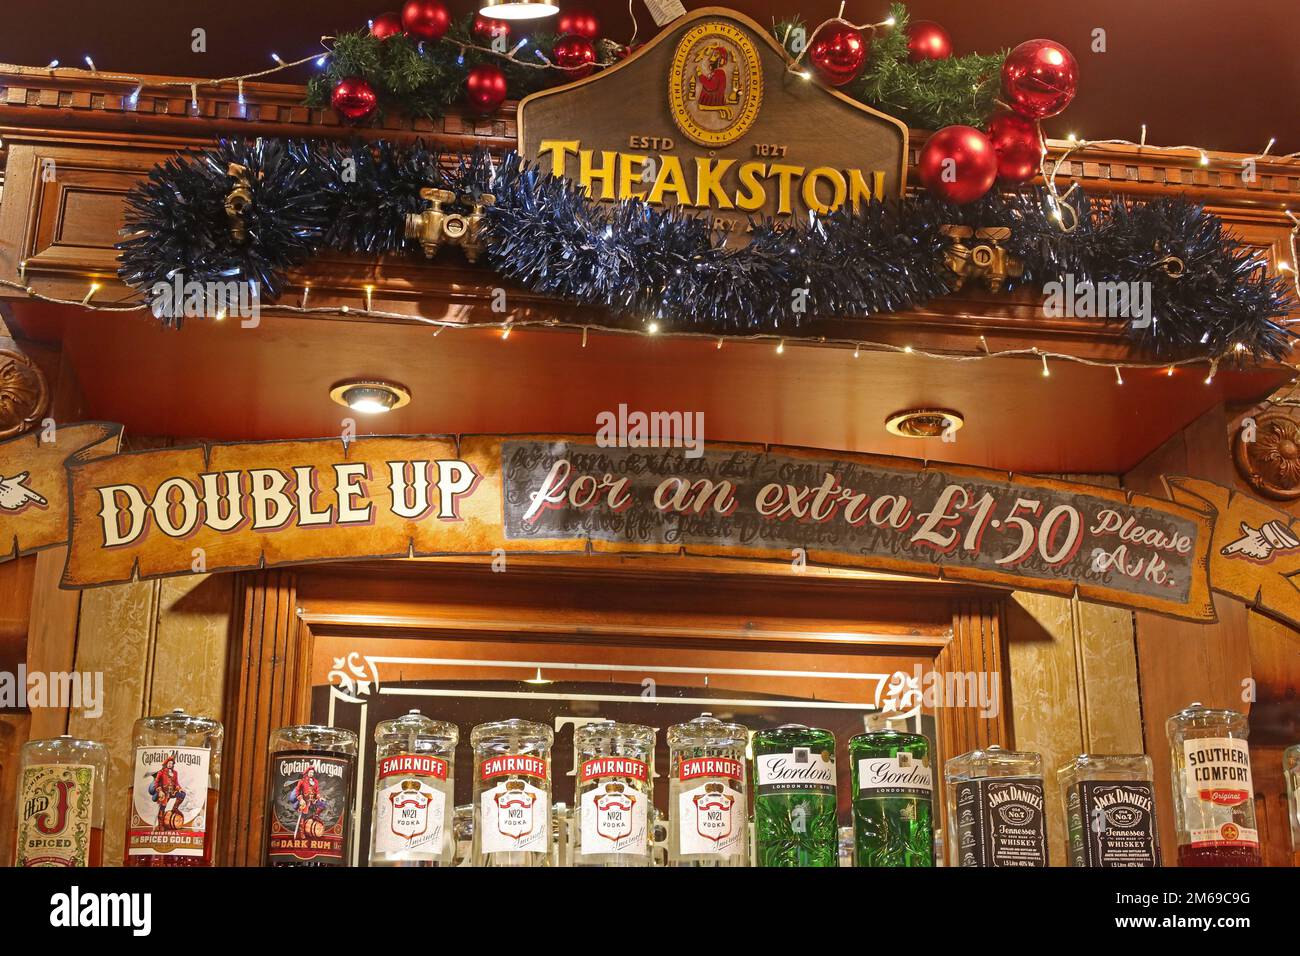 Sign suggesting Christmas drinkers, should double up spirits, for just an extra £1.50, at a Theakston pub in Manchester, England, UK, M1 5NE Stock Photo